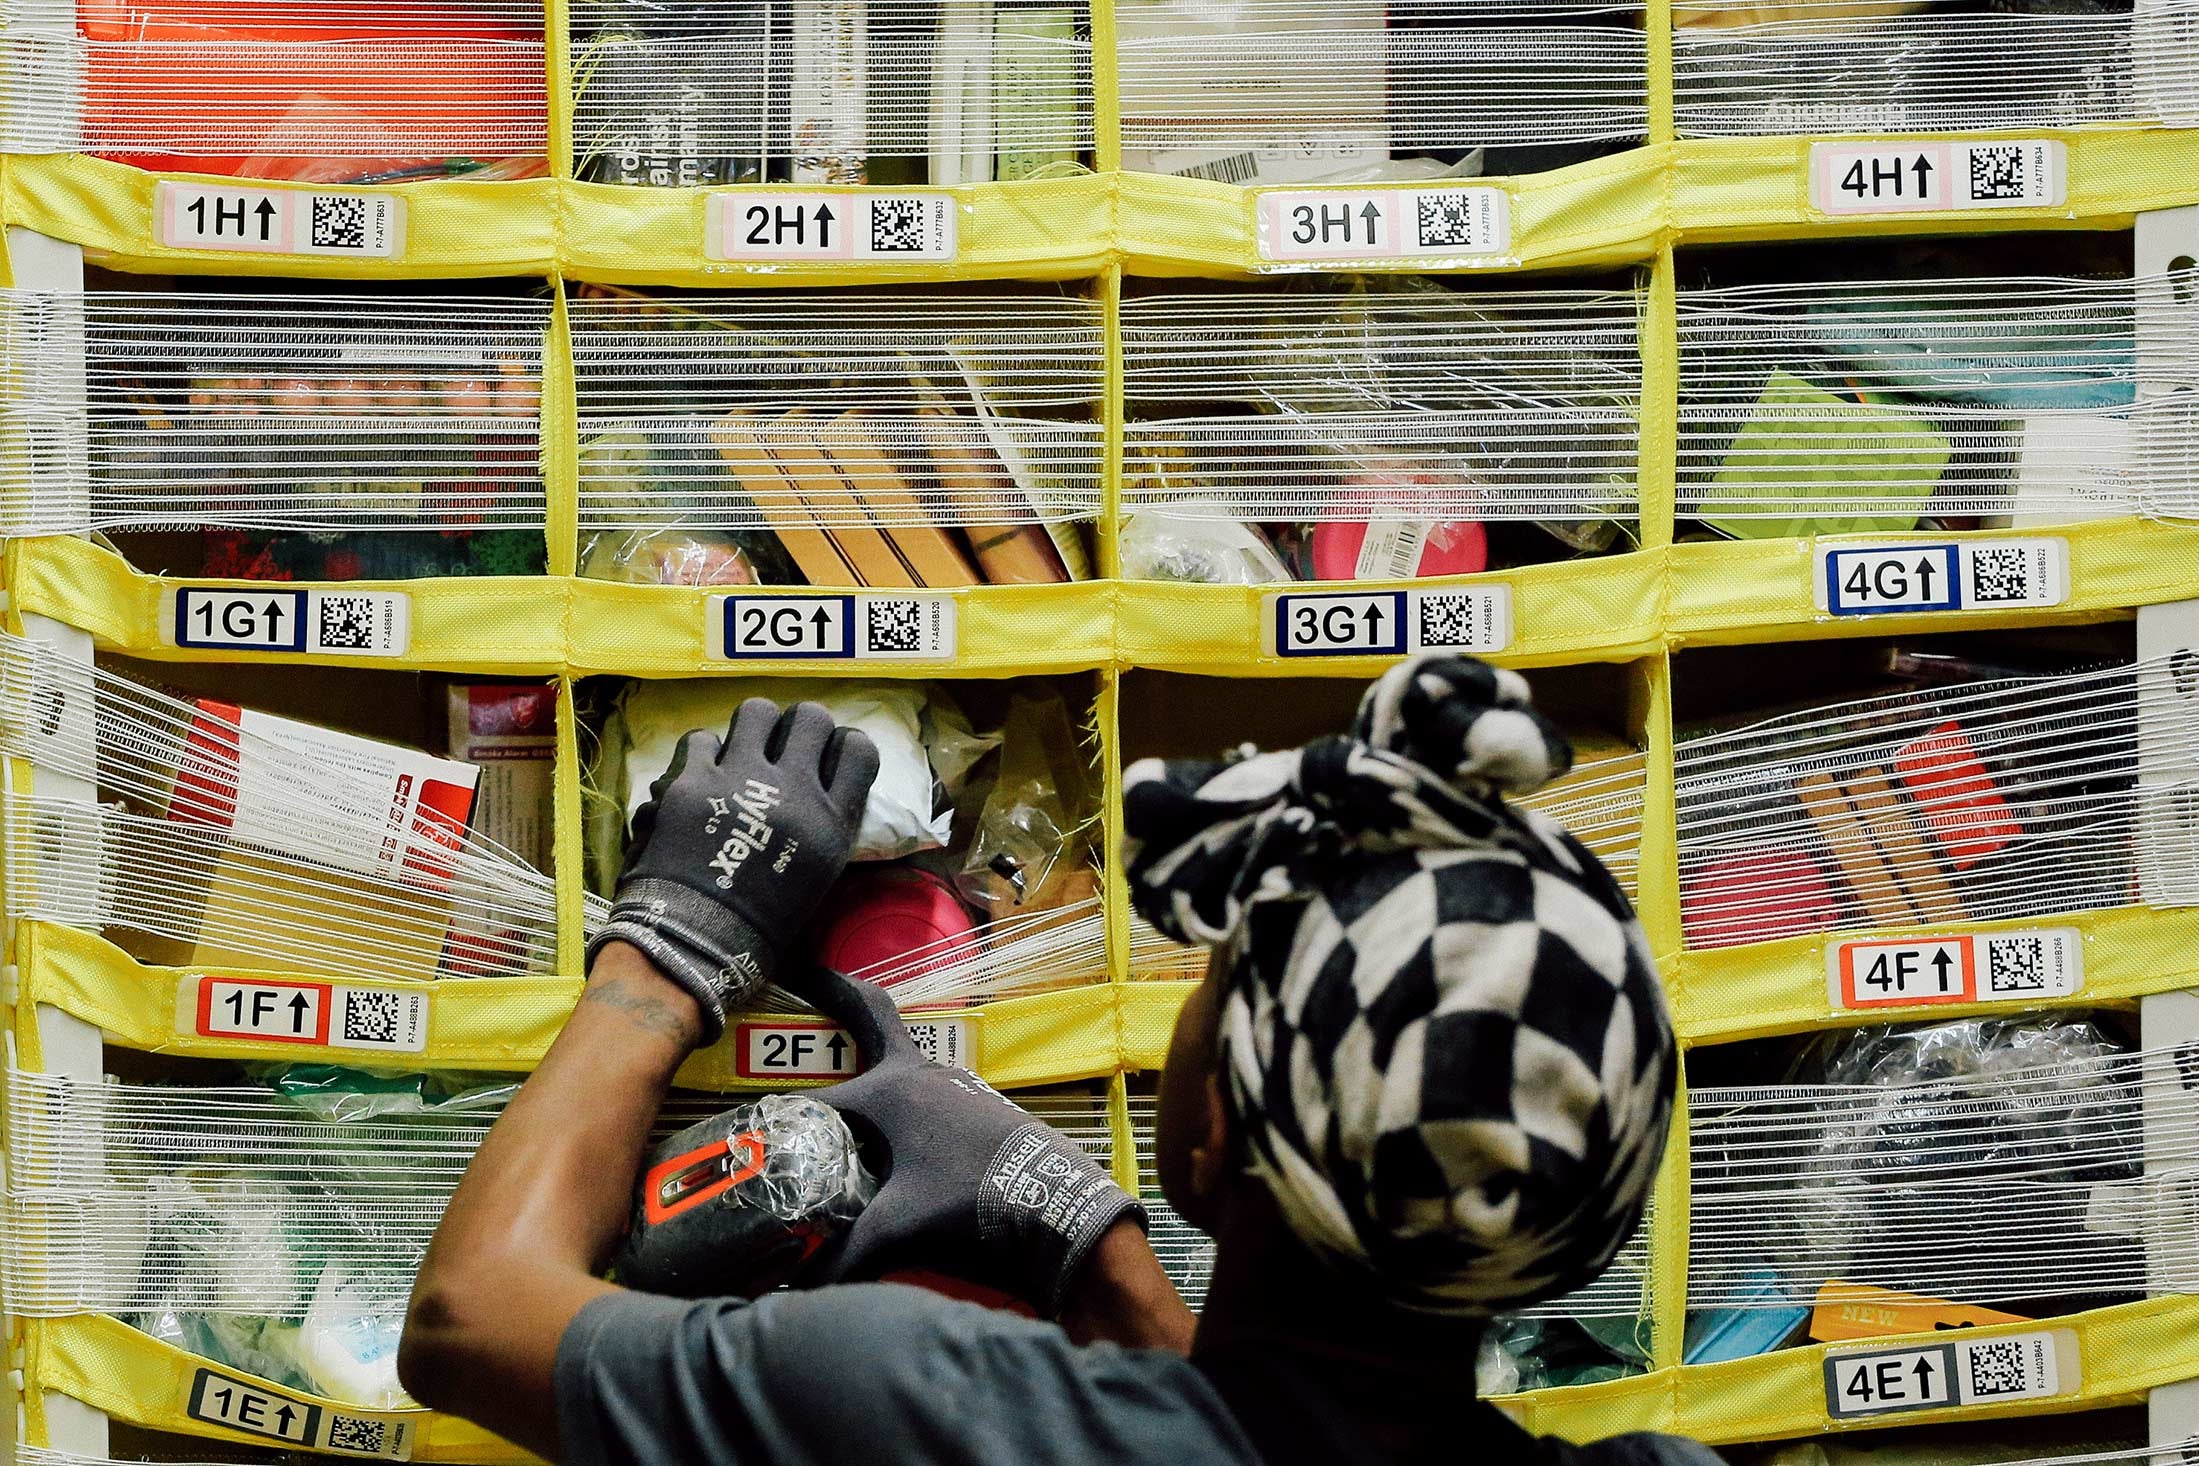 A worker sorts products into bins inside an Amazon Fulfillment Center.